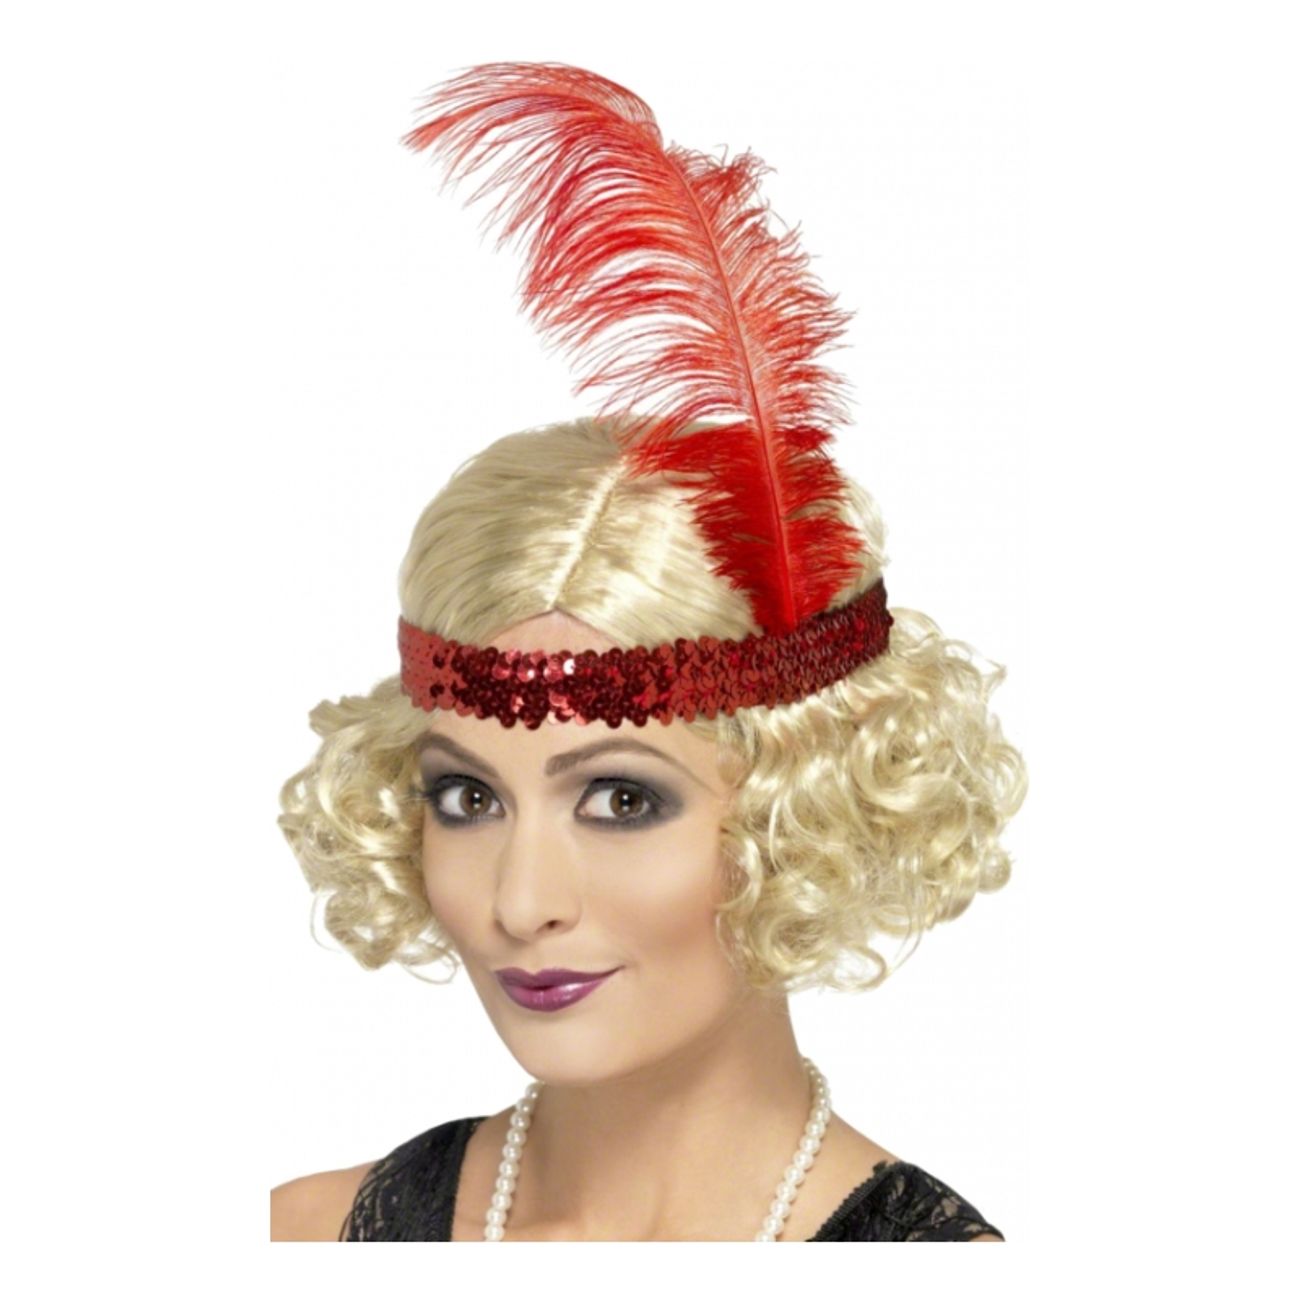 blonde-flapper-wig-with-headband-1